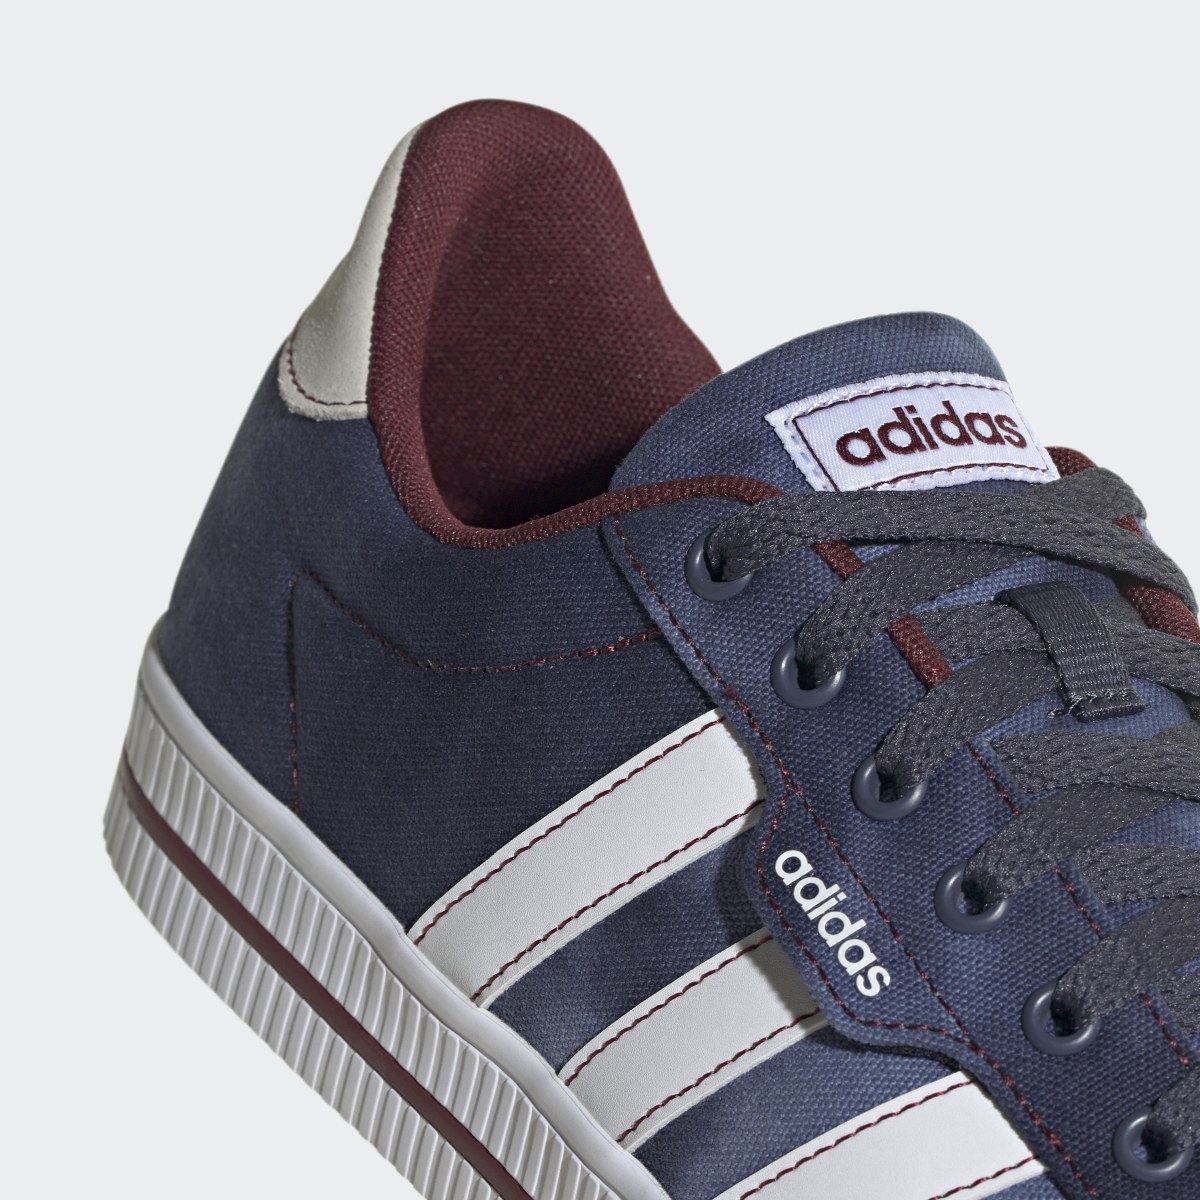 Adidas Daily 3.0 Lifestyle Skateboarding Suede Shoes. 9